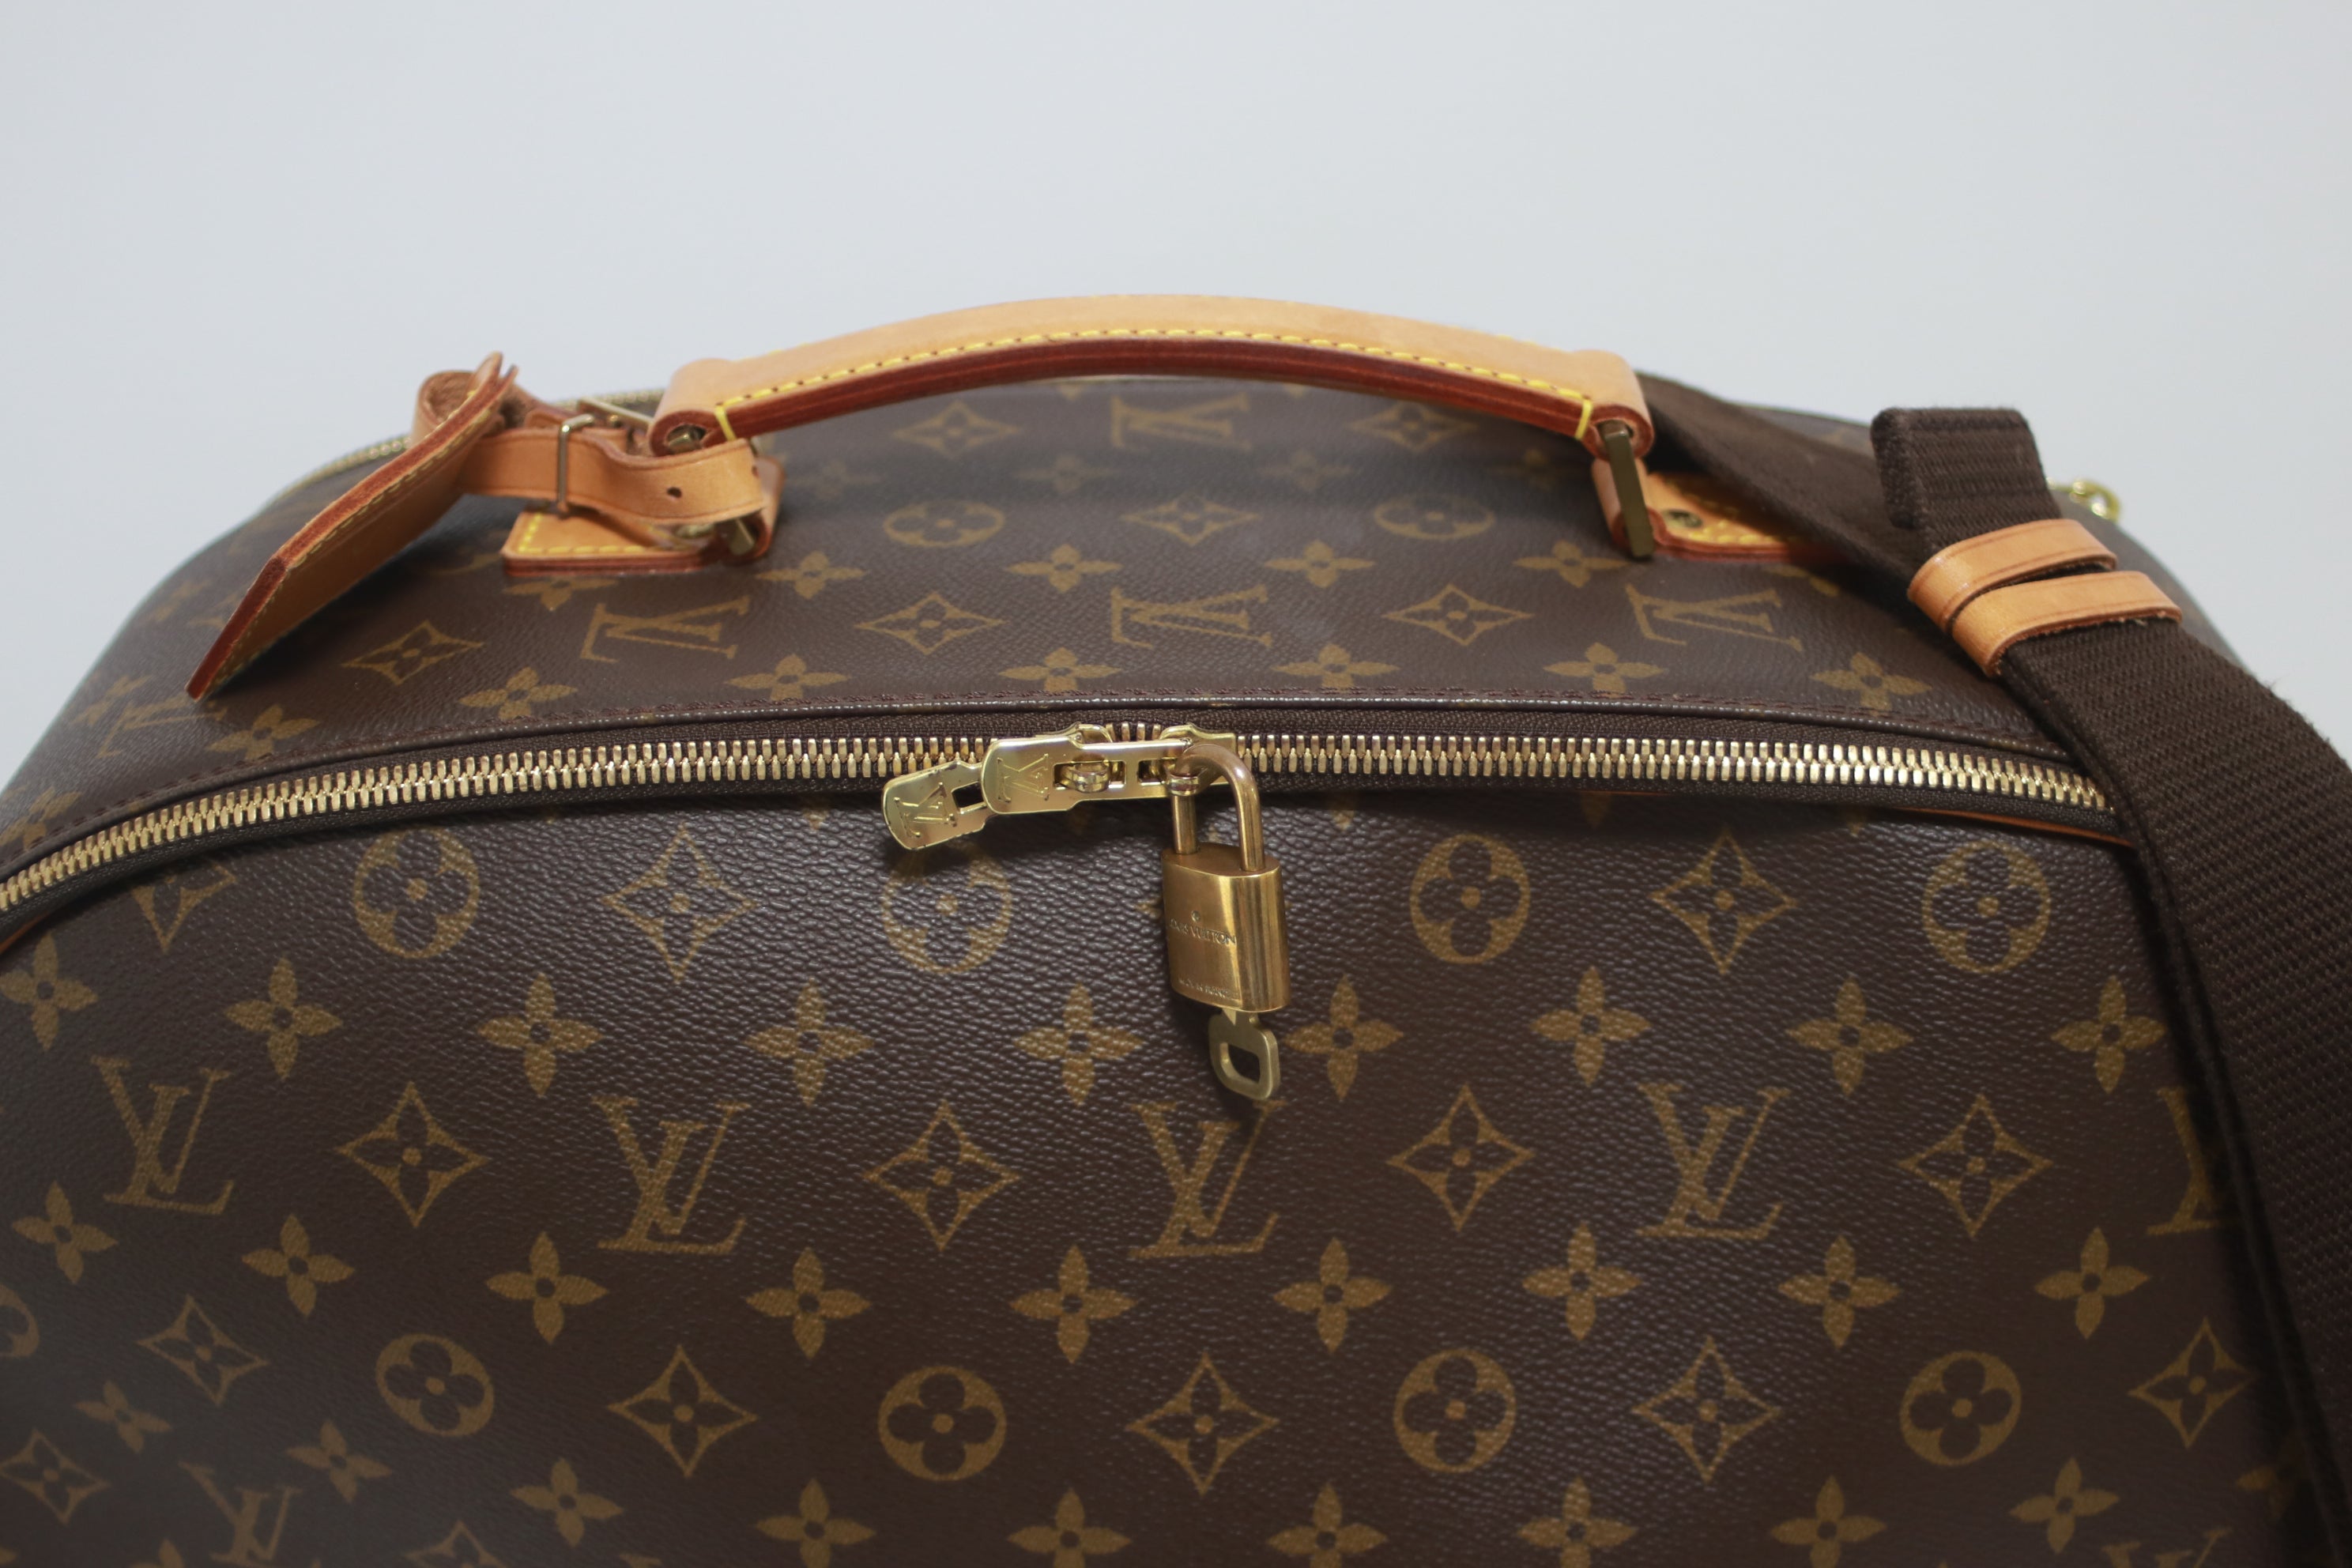 Louis Vuitton Packall PM Travel Bag Used (6679)